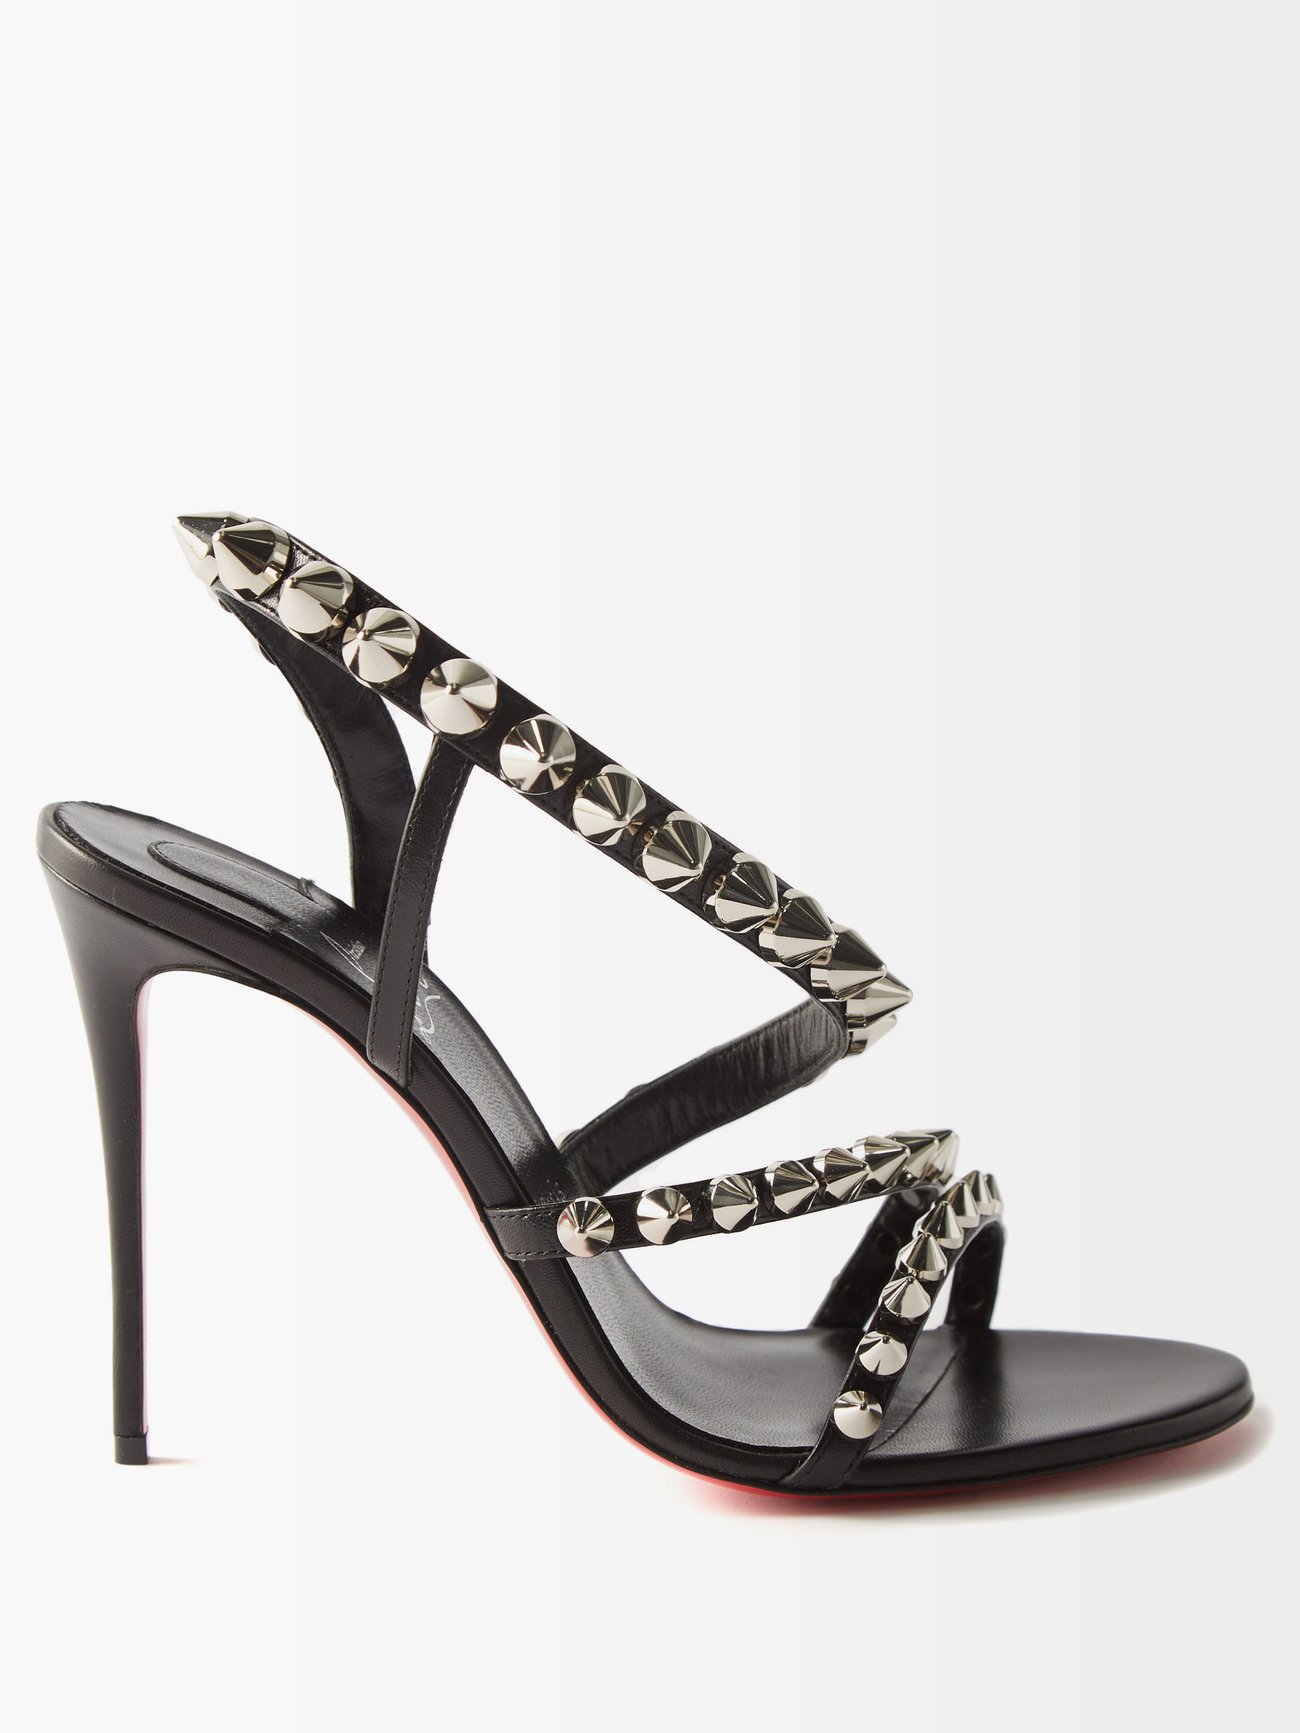 Black Spikita 100 spiked-leather sandals | Christian Louboutin | MATCHES UK